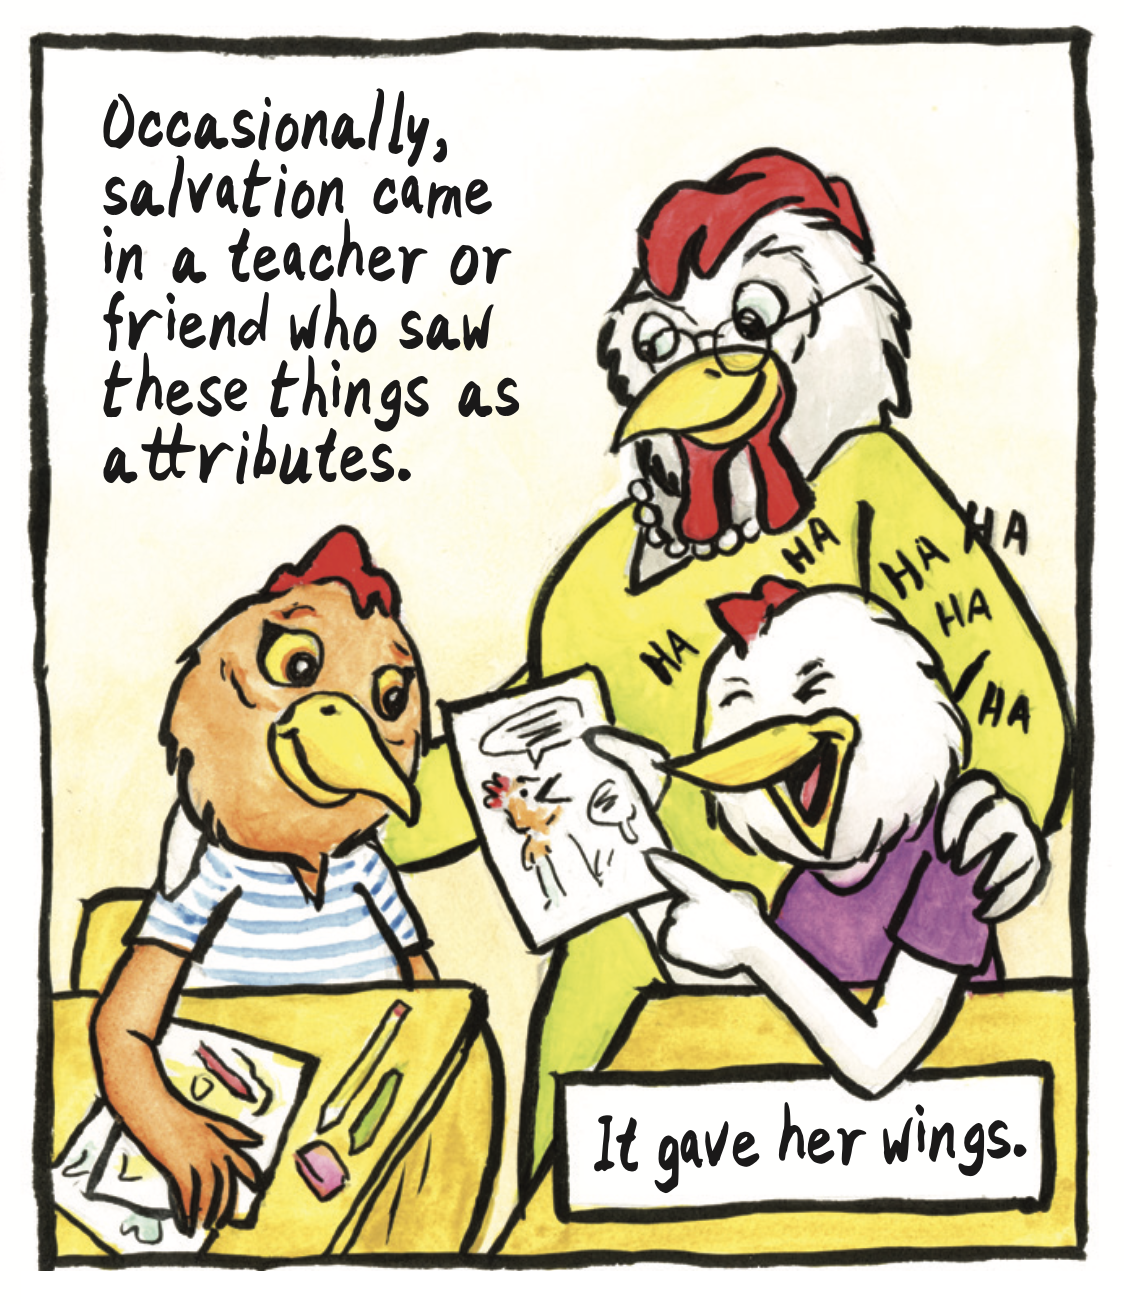 â€œOccasionally, salvation came in a teacher or friend who saw these things as attributes. It gave her wings.â€ The red chicken smiles as her friend looks at her comic and laughs from enjoyment, and a teacher looks on at her proudly.